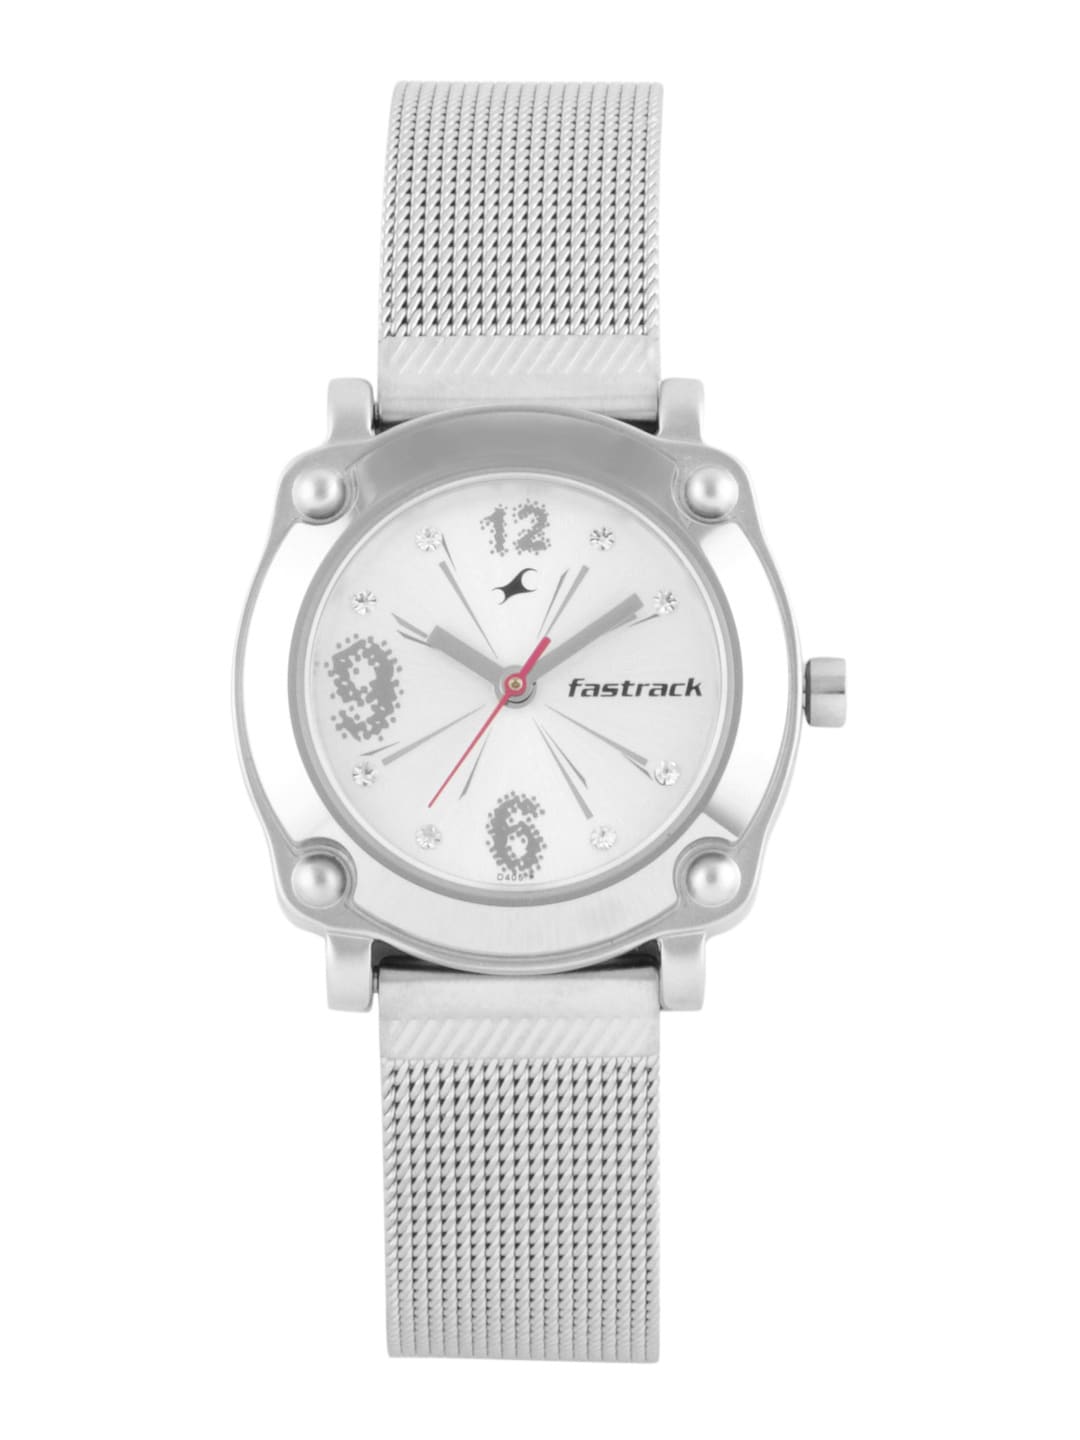 Fastrack Women White Dial Watch NB6027sm01